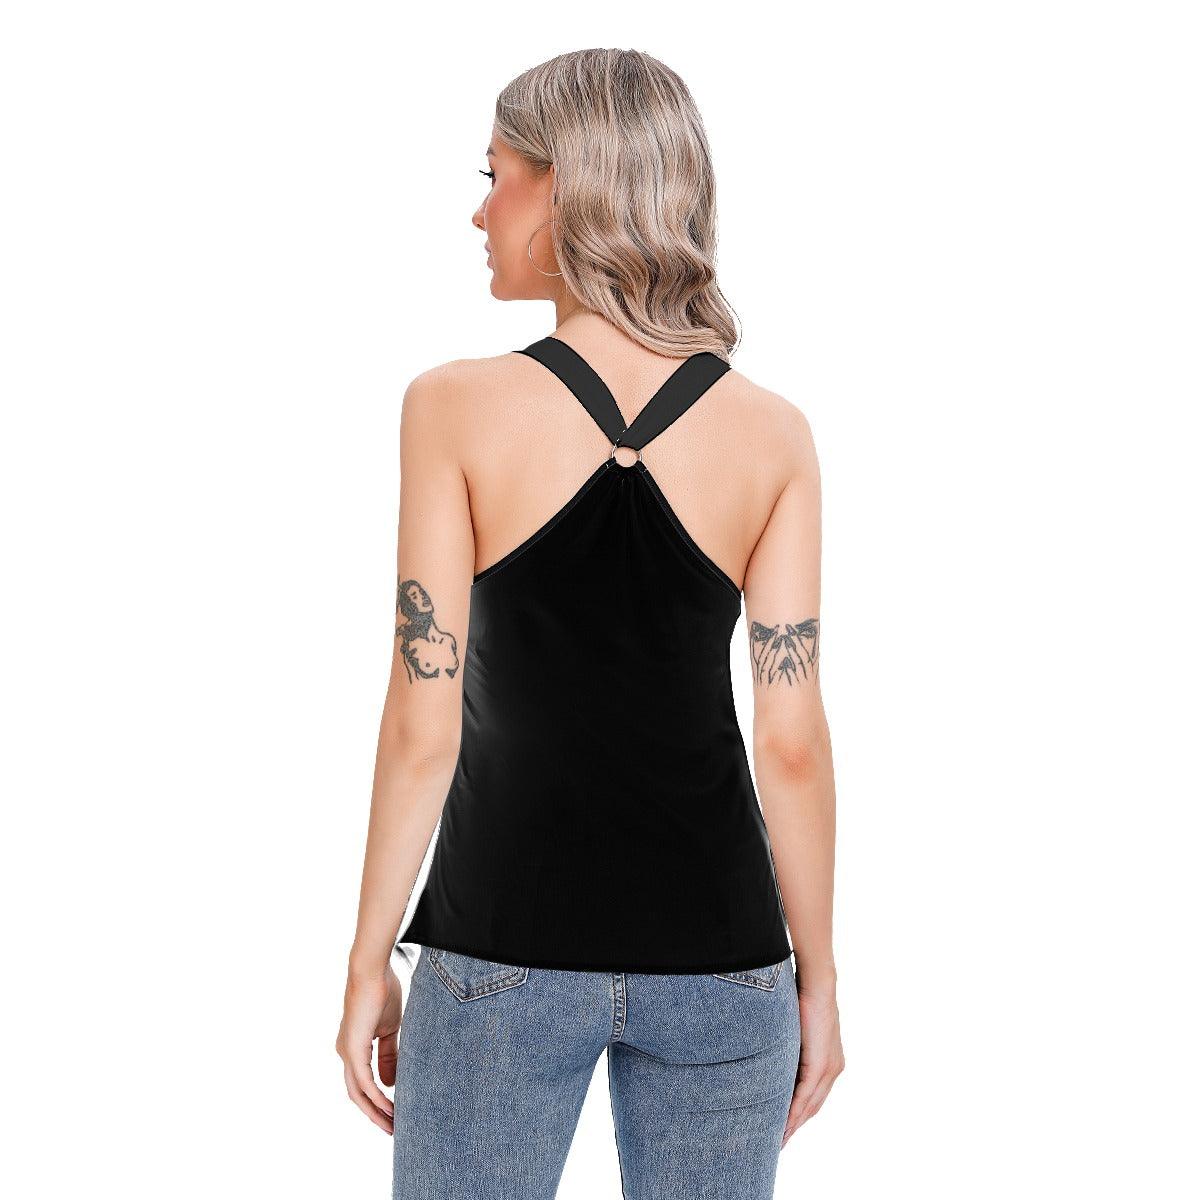 From Our Fist Kiss V-Neck O Ring Tank Top - Wonder Skull